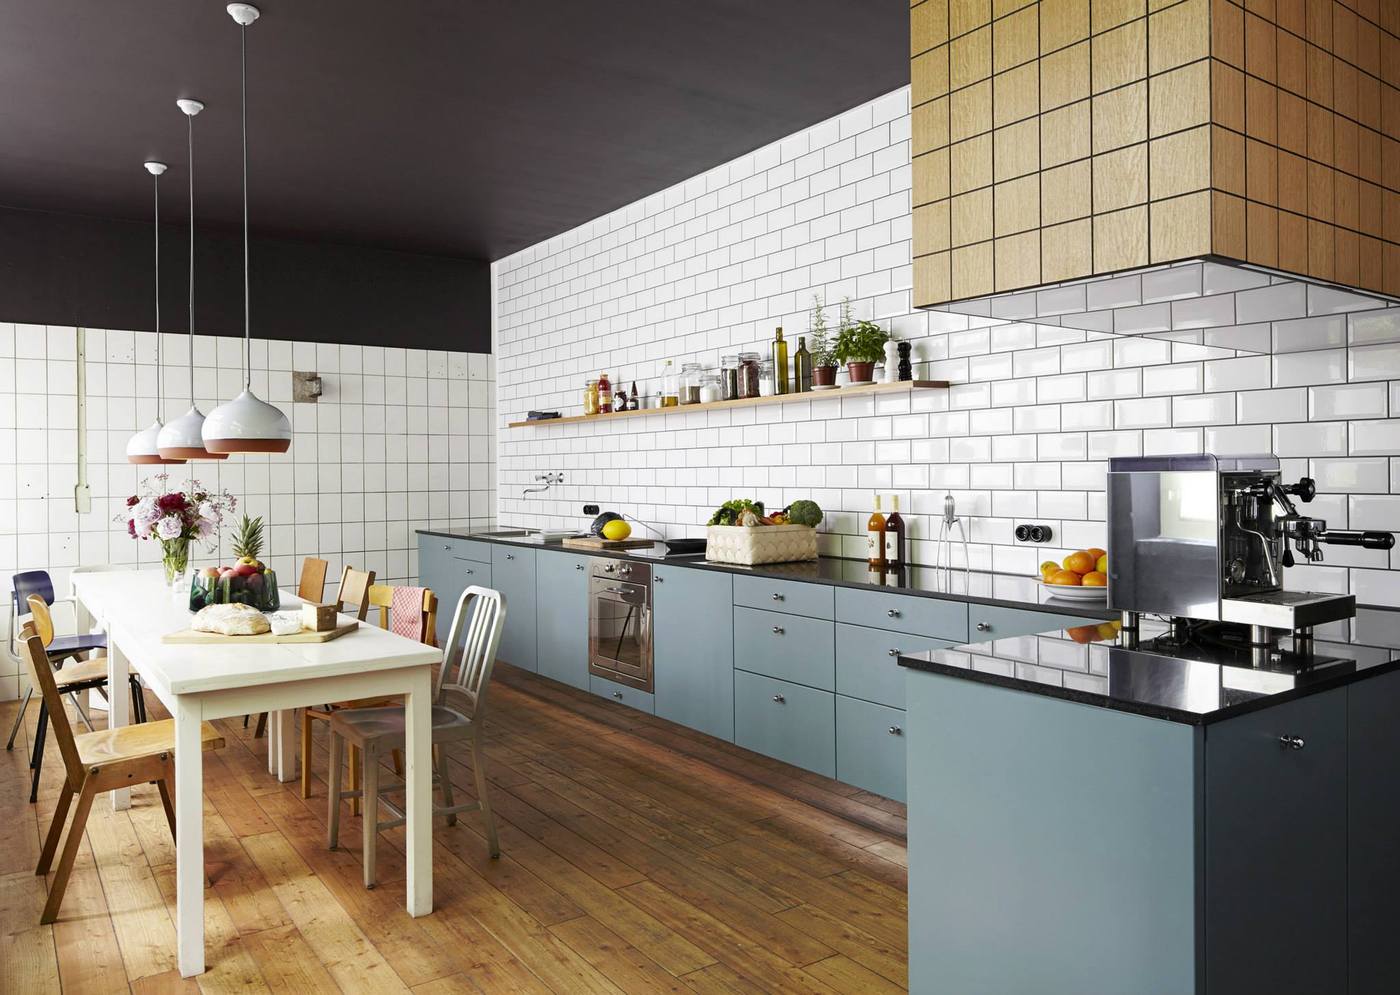 kitchen tile kitchens different subway urban designs country incredibly universal vs